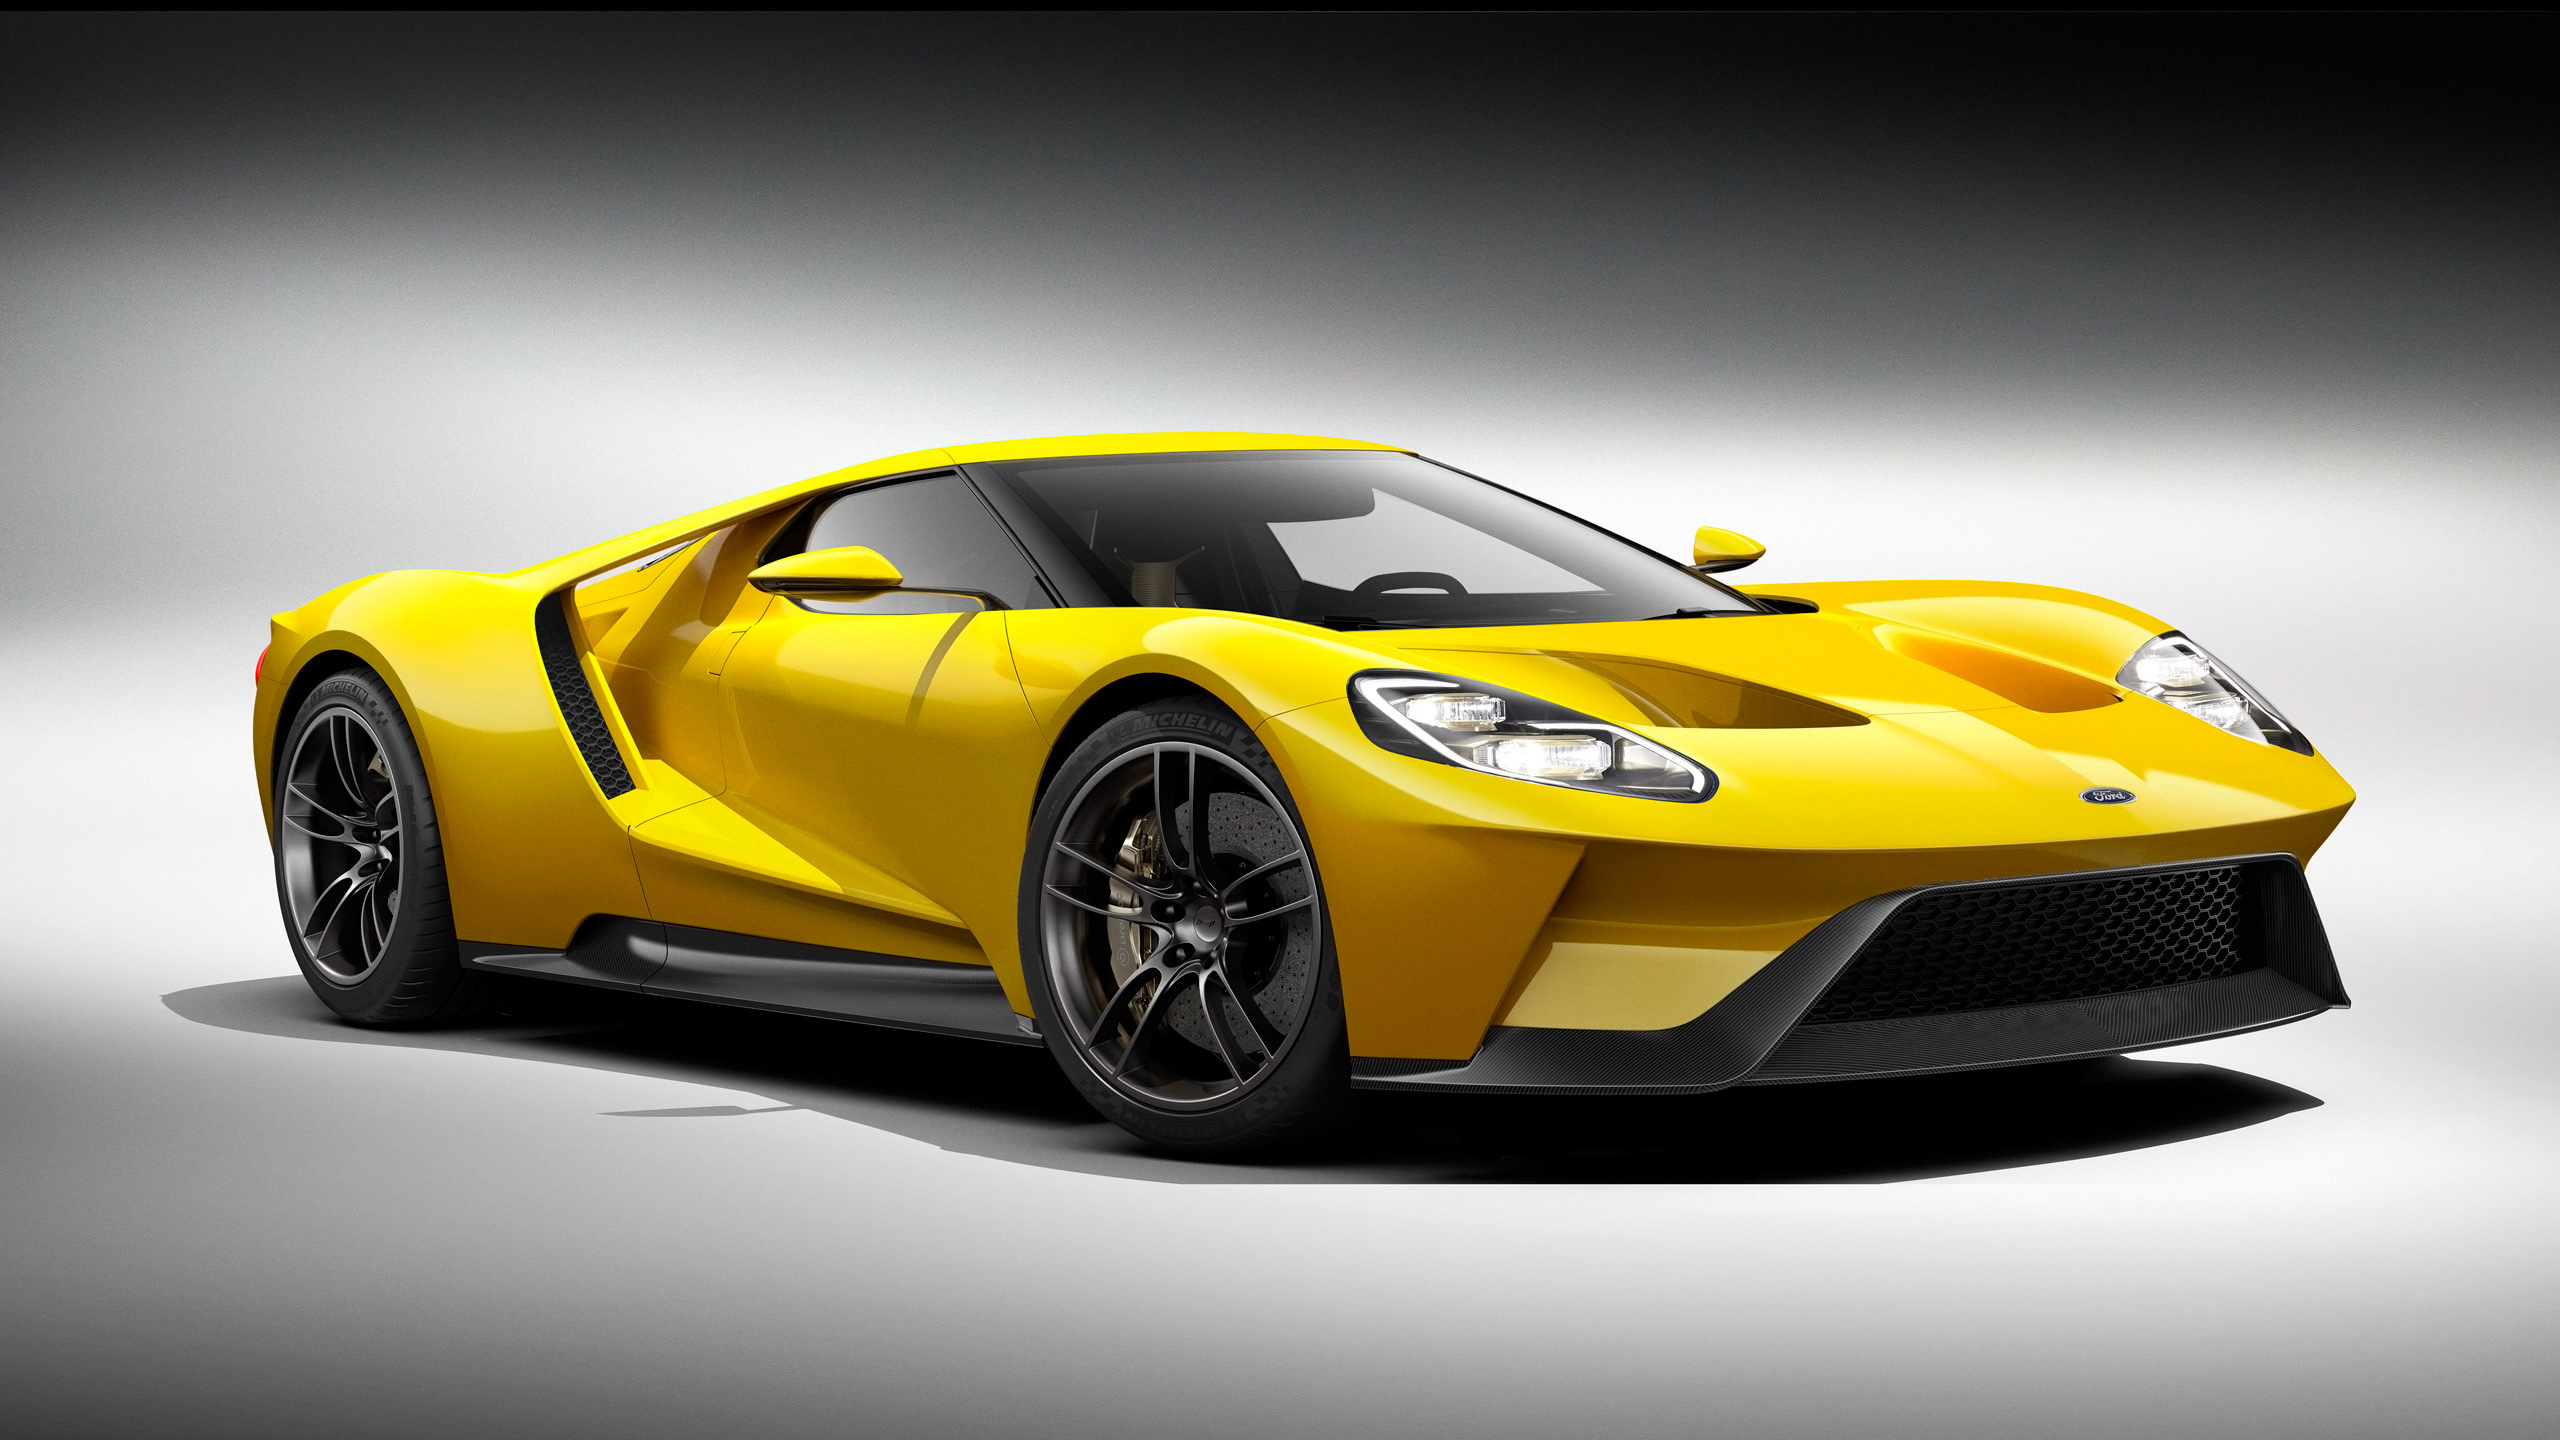 48 New Ford Gt Supercar Wallpapers On Wallpapersafari